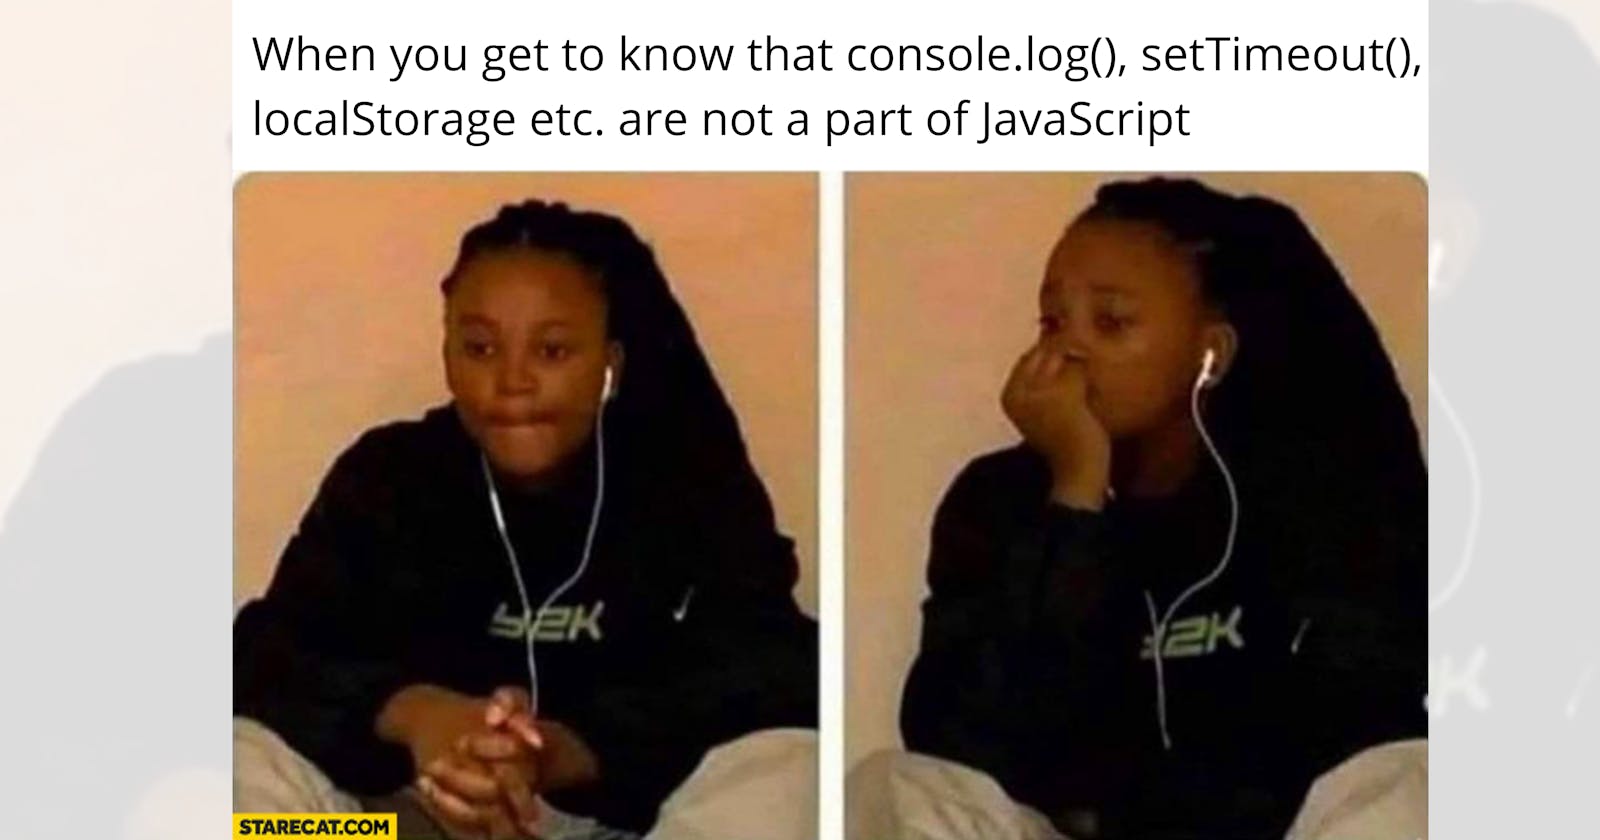 Console.log() is not JavaScript